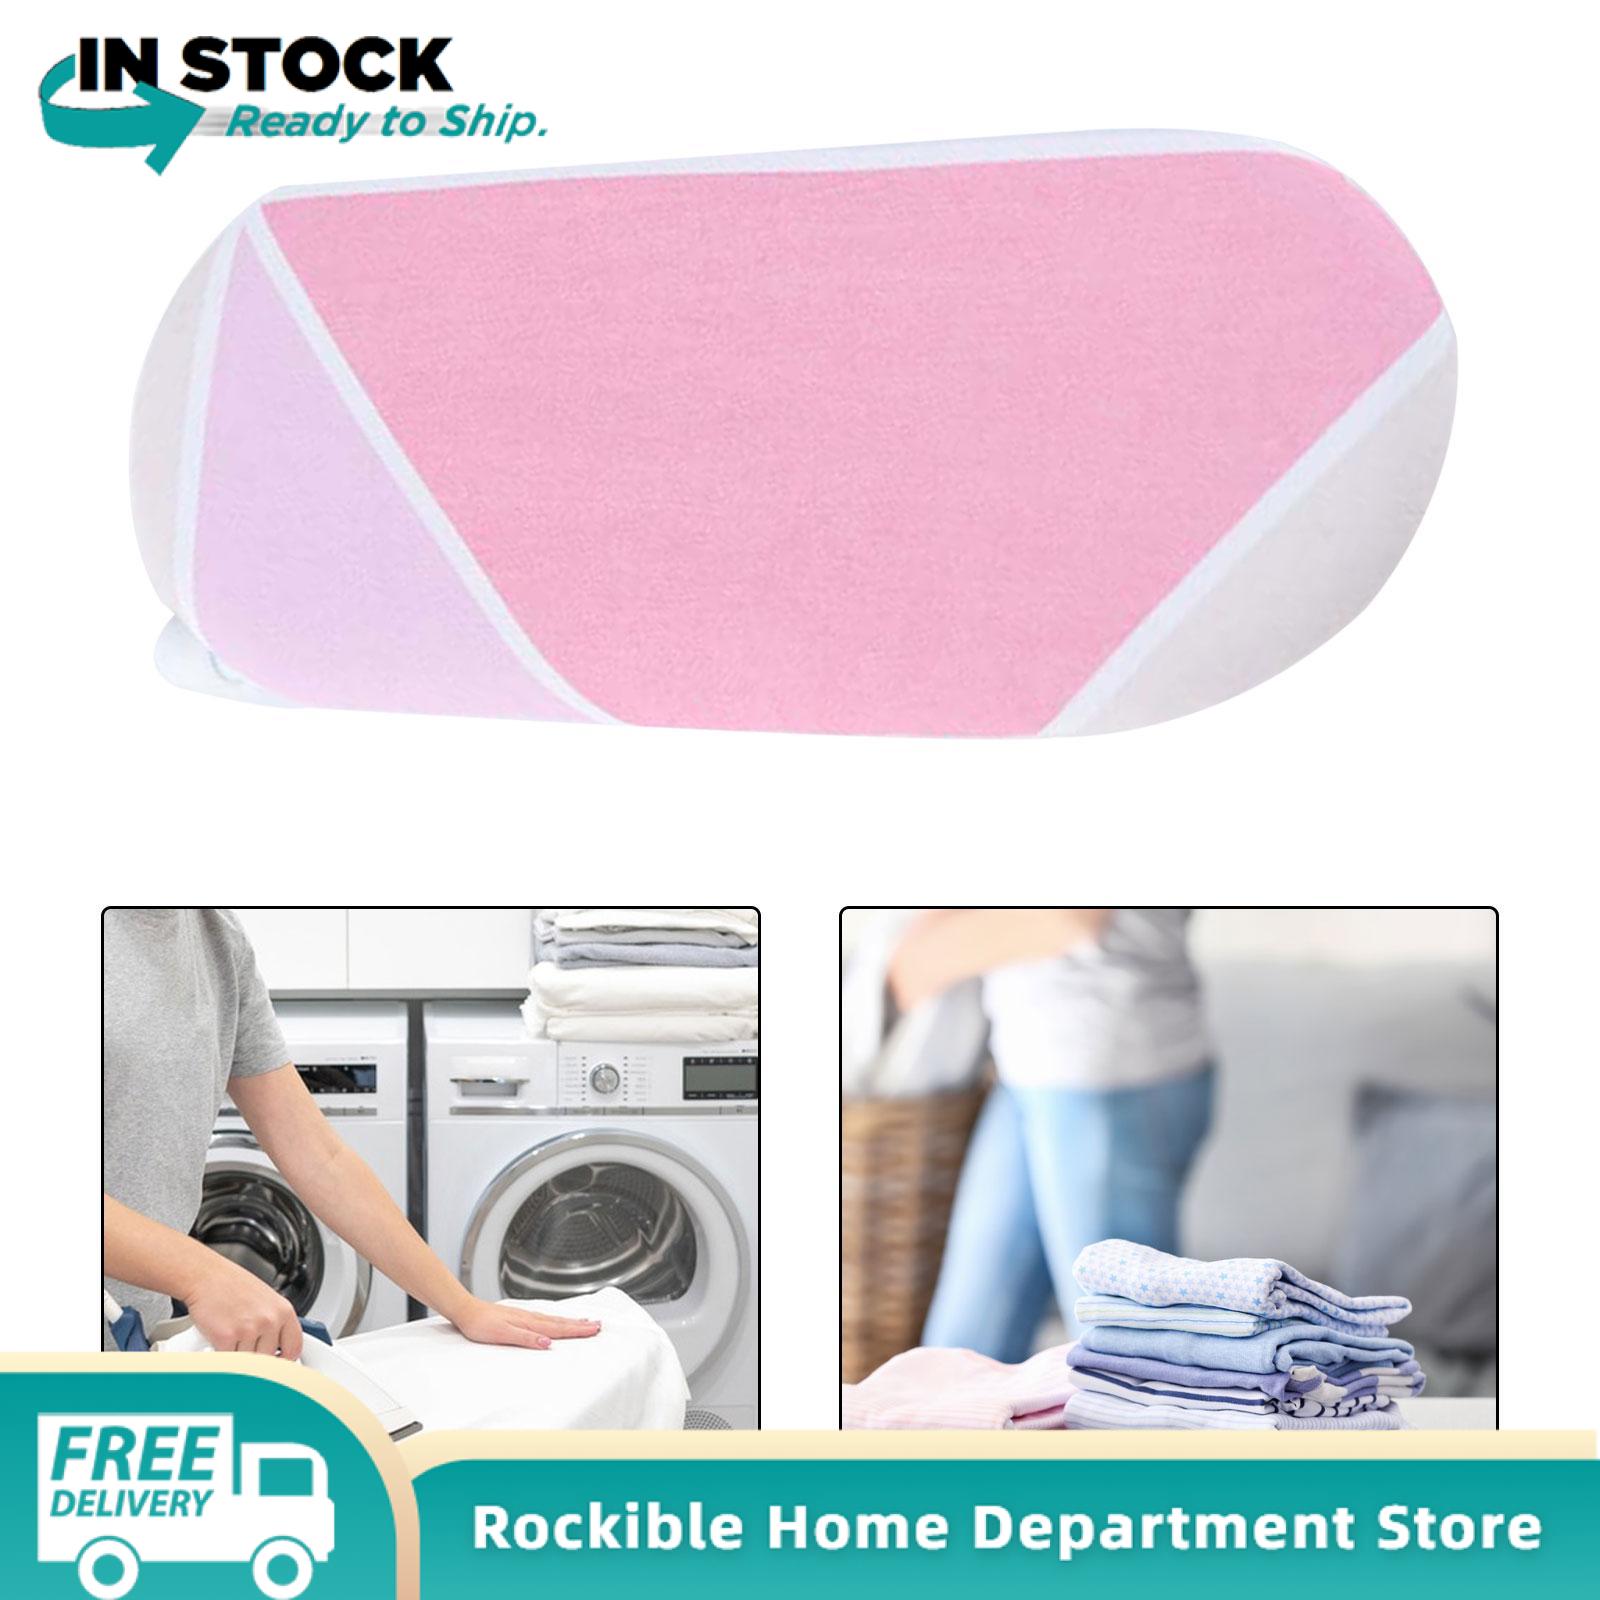 rockible Small Ironing Board Auxiliary Tool for Laundry Room Sewing Room